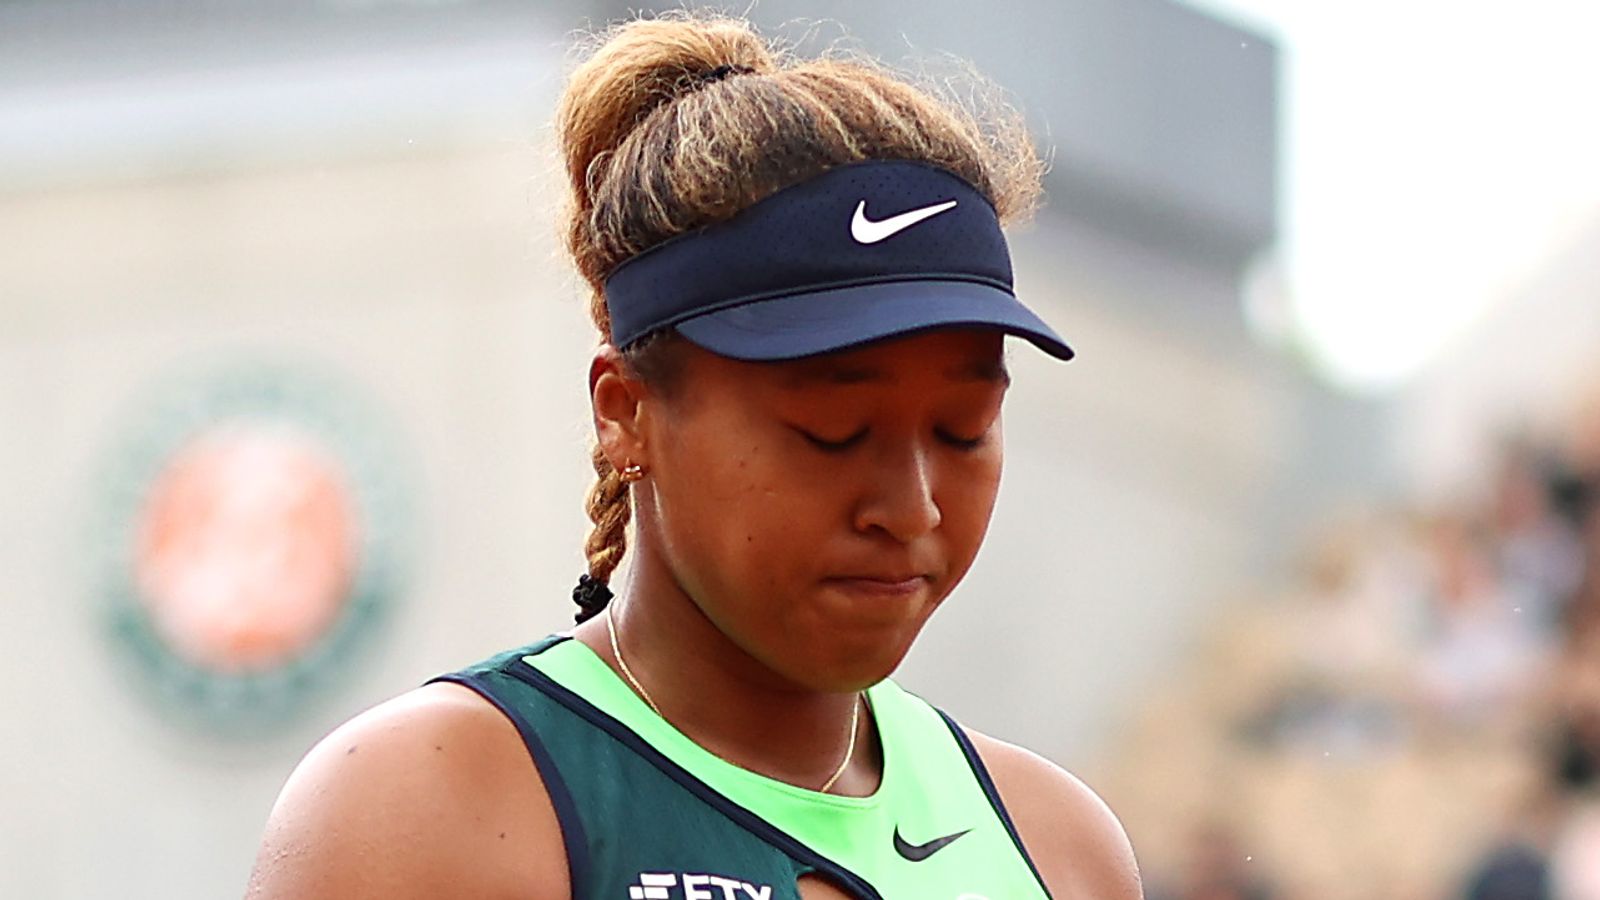 Naomi Osaka knocked out of French Open and casts doubt on playing Wimbledon